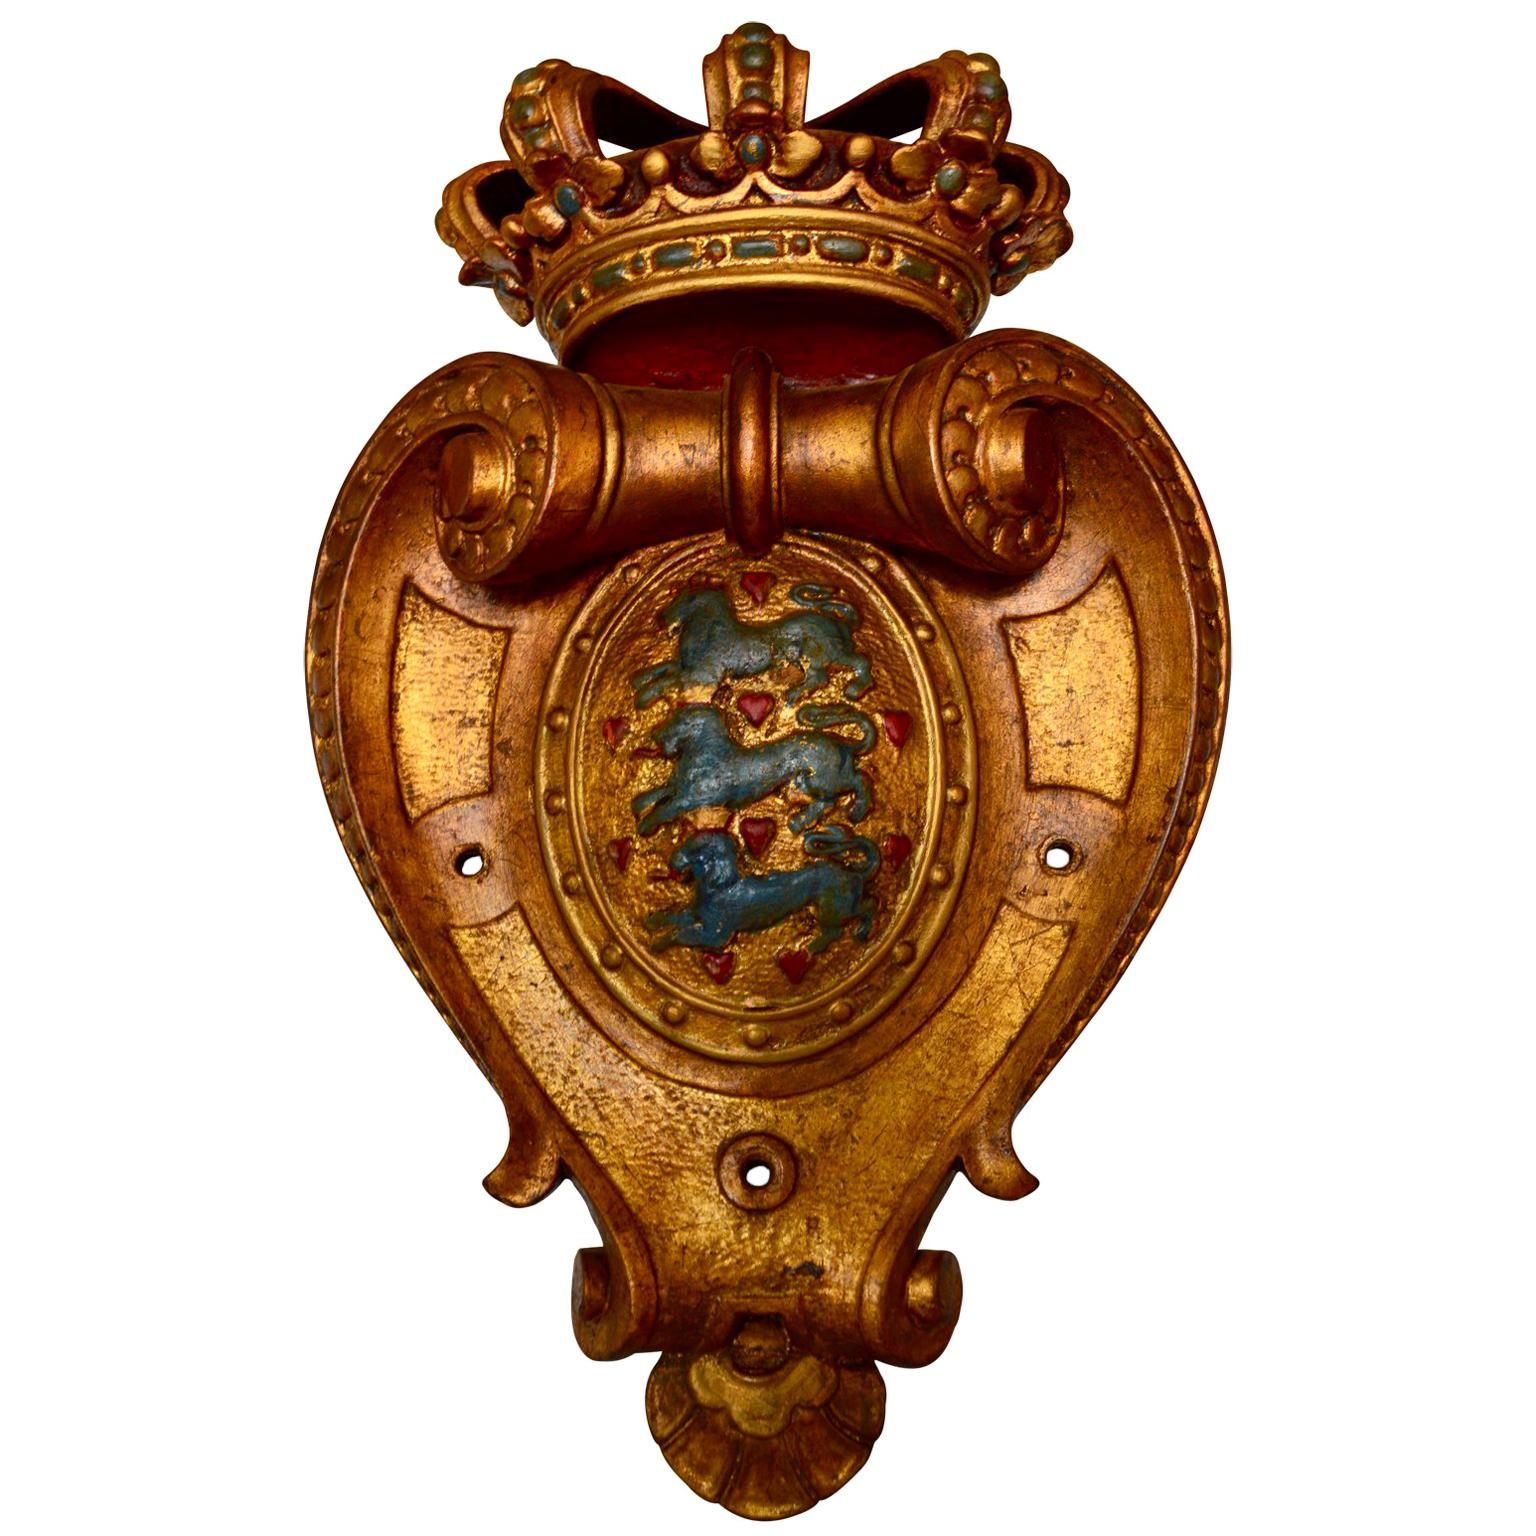 Gilded Wooden Plaque With The Carved Coat of Arms Of Denmark